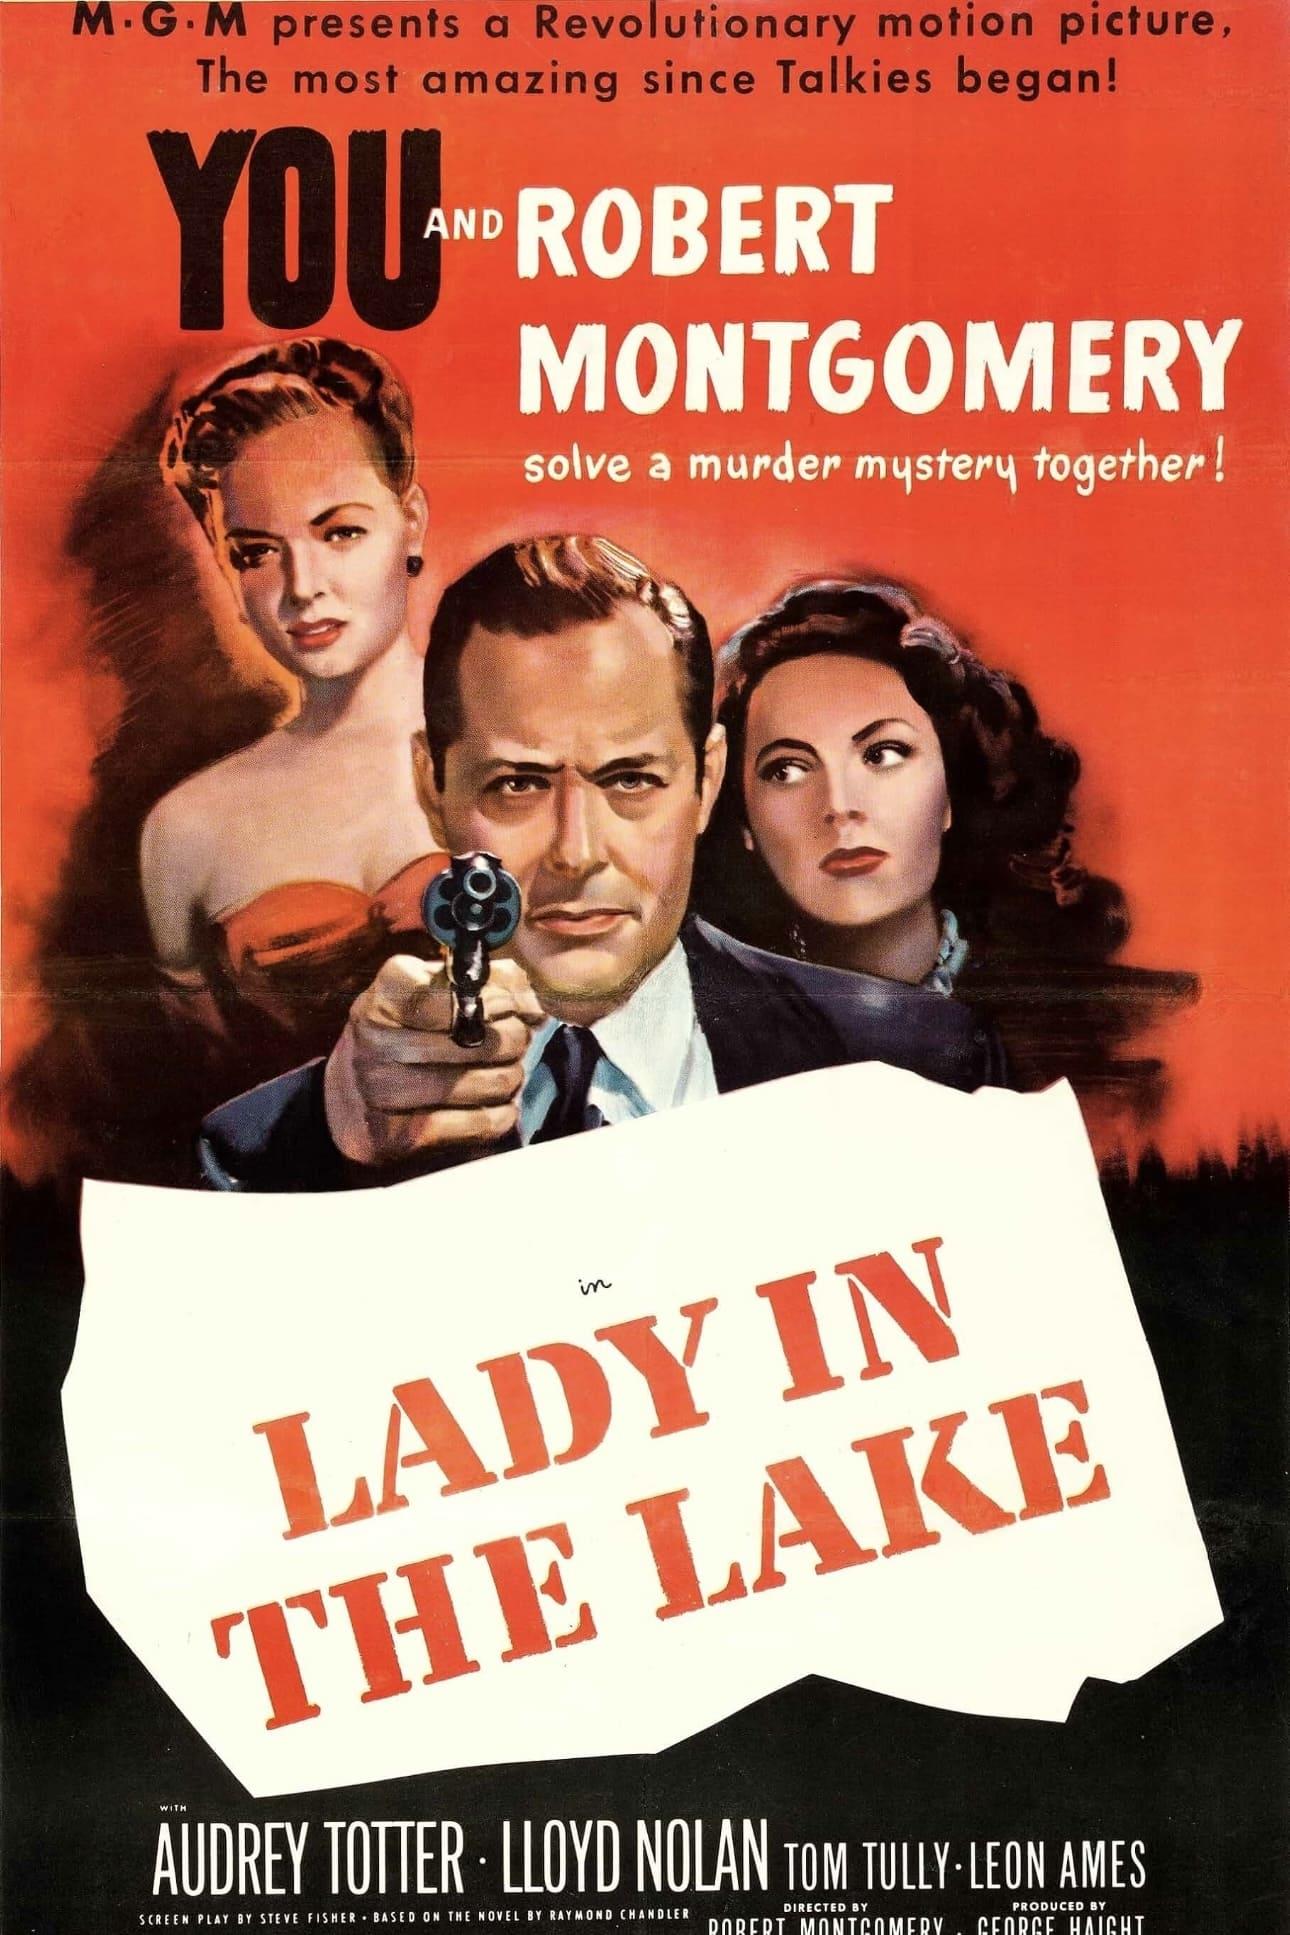 Lady in the Lake poster